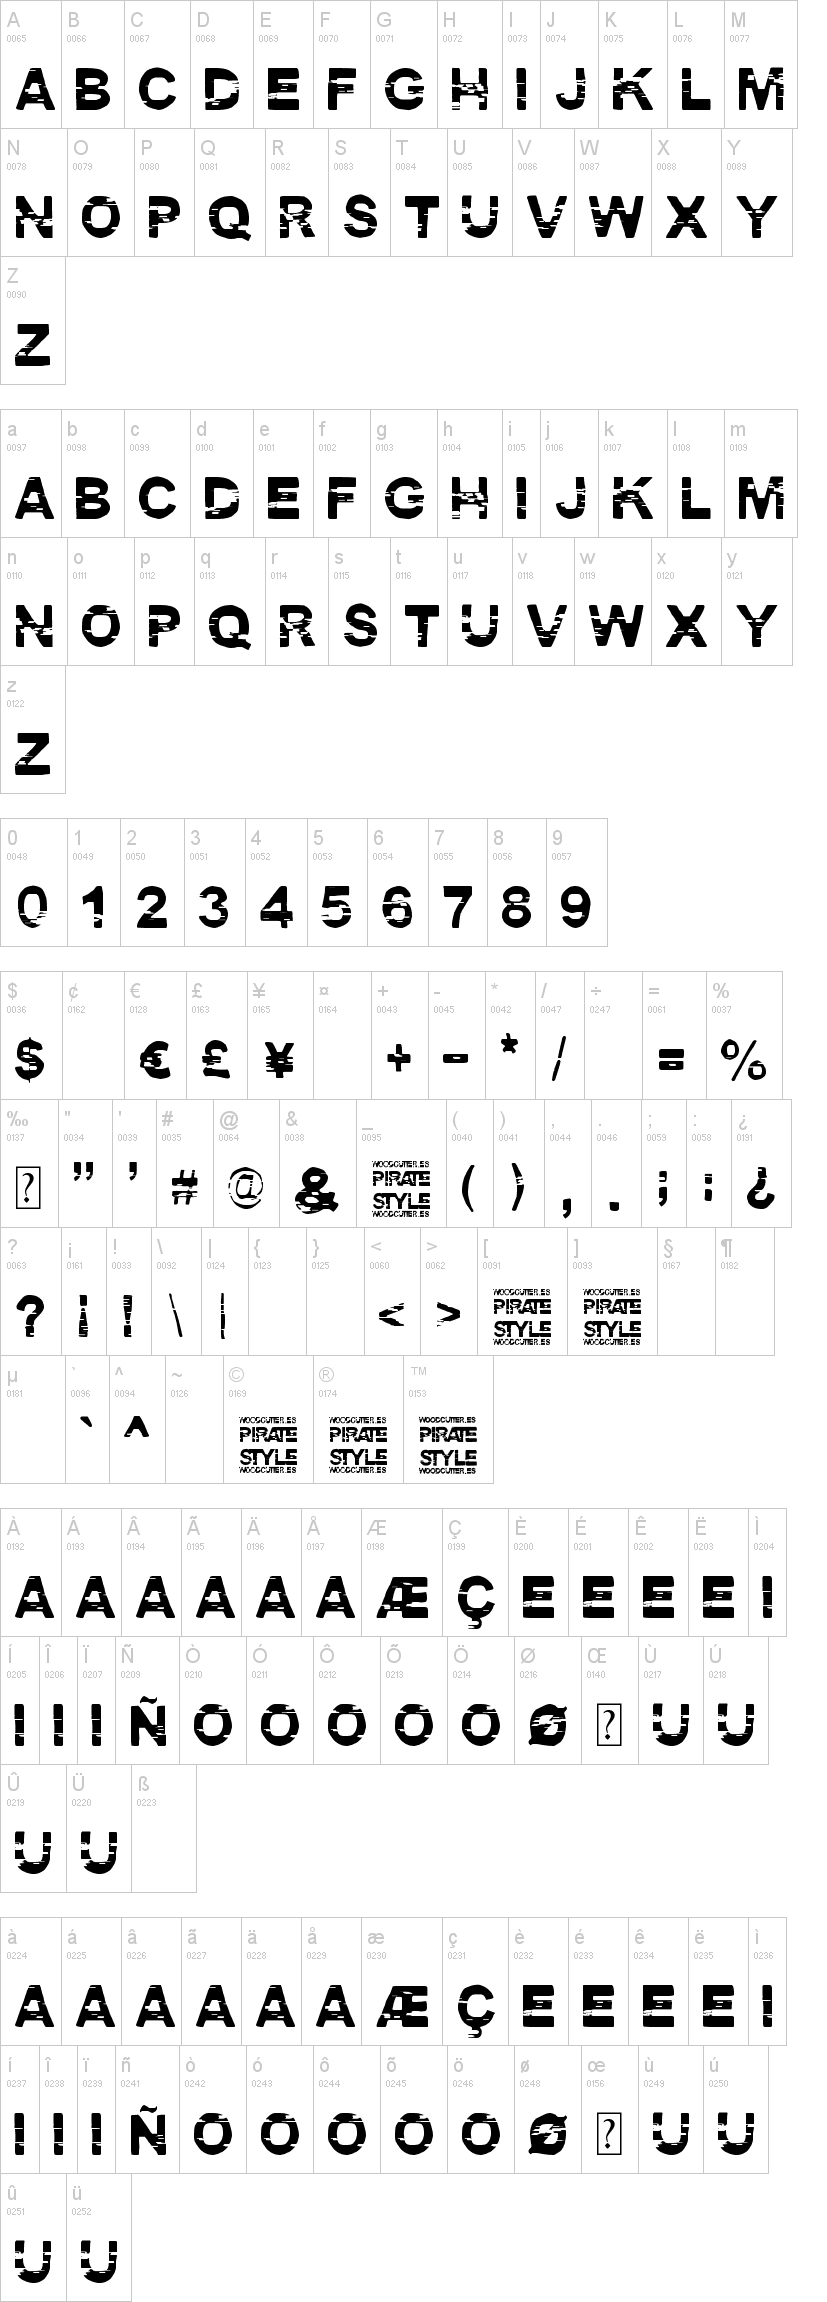 pirate fonts for free